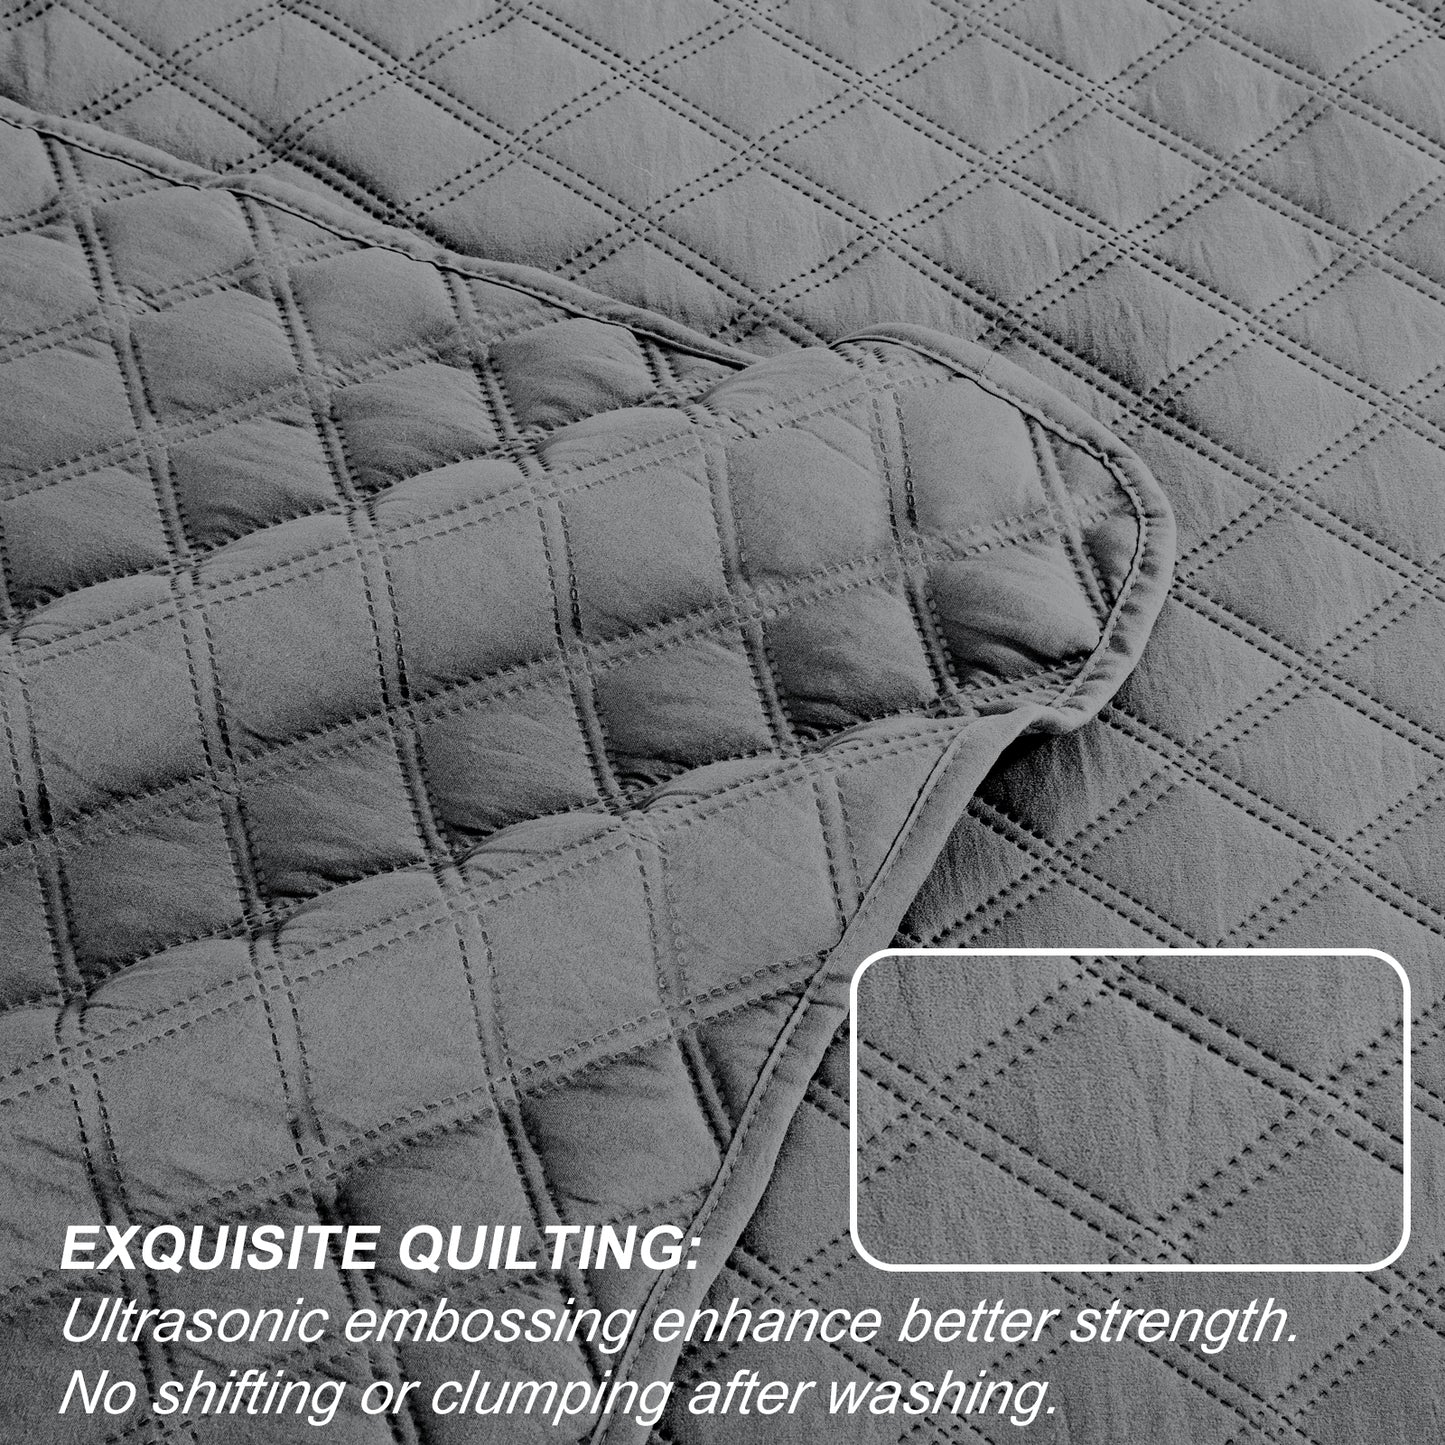 Exclusivo Mezcla 2-Piece Gray Twin Size Quilt Set, Box Pattern Ultrasonic Lightweight and Soft Quilts/Bedspreads/Coverlets/Bedding Set (1 Quilt, 1 Pillow Sham) for All Seasons